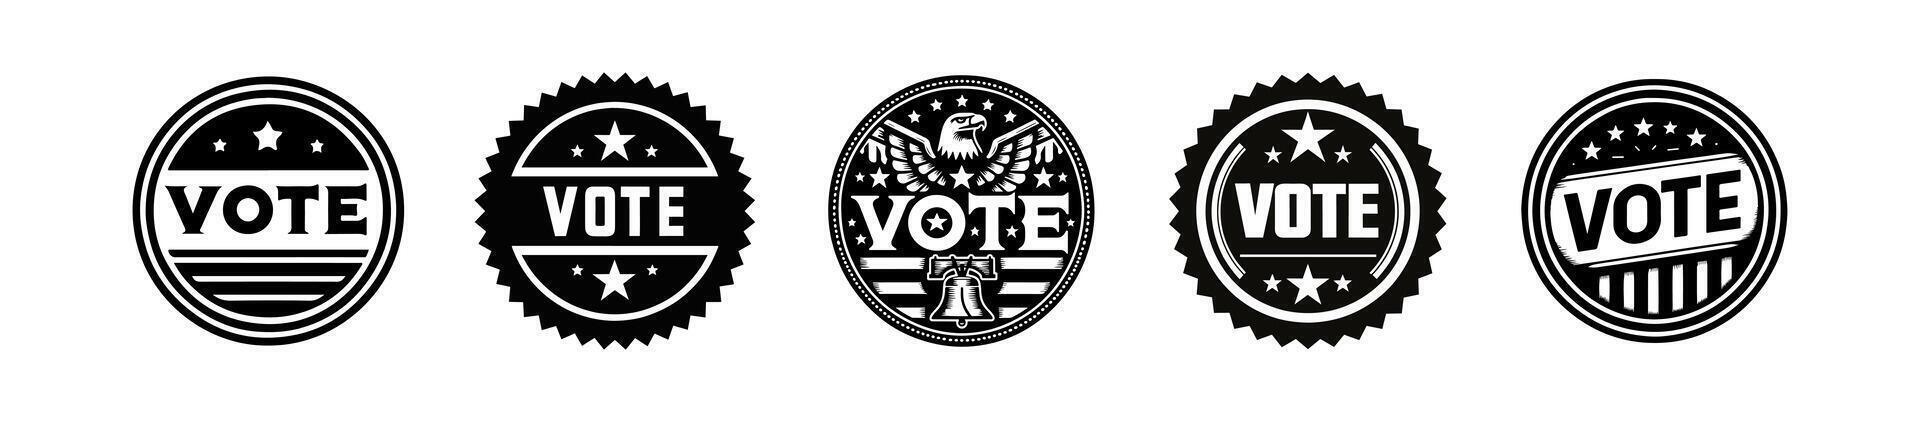 Set of Bold VOTE emblems in circular badge design. Graphic icons. Illustration on white backdrop. Concept of democracy, elections, politics. Design for badge, sticker, voting campaign, print vector